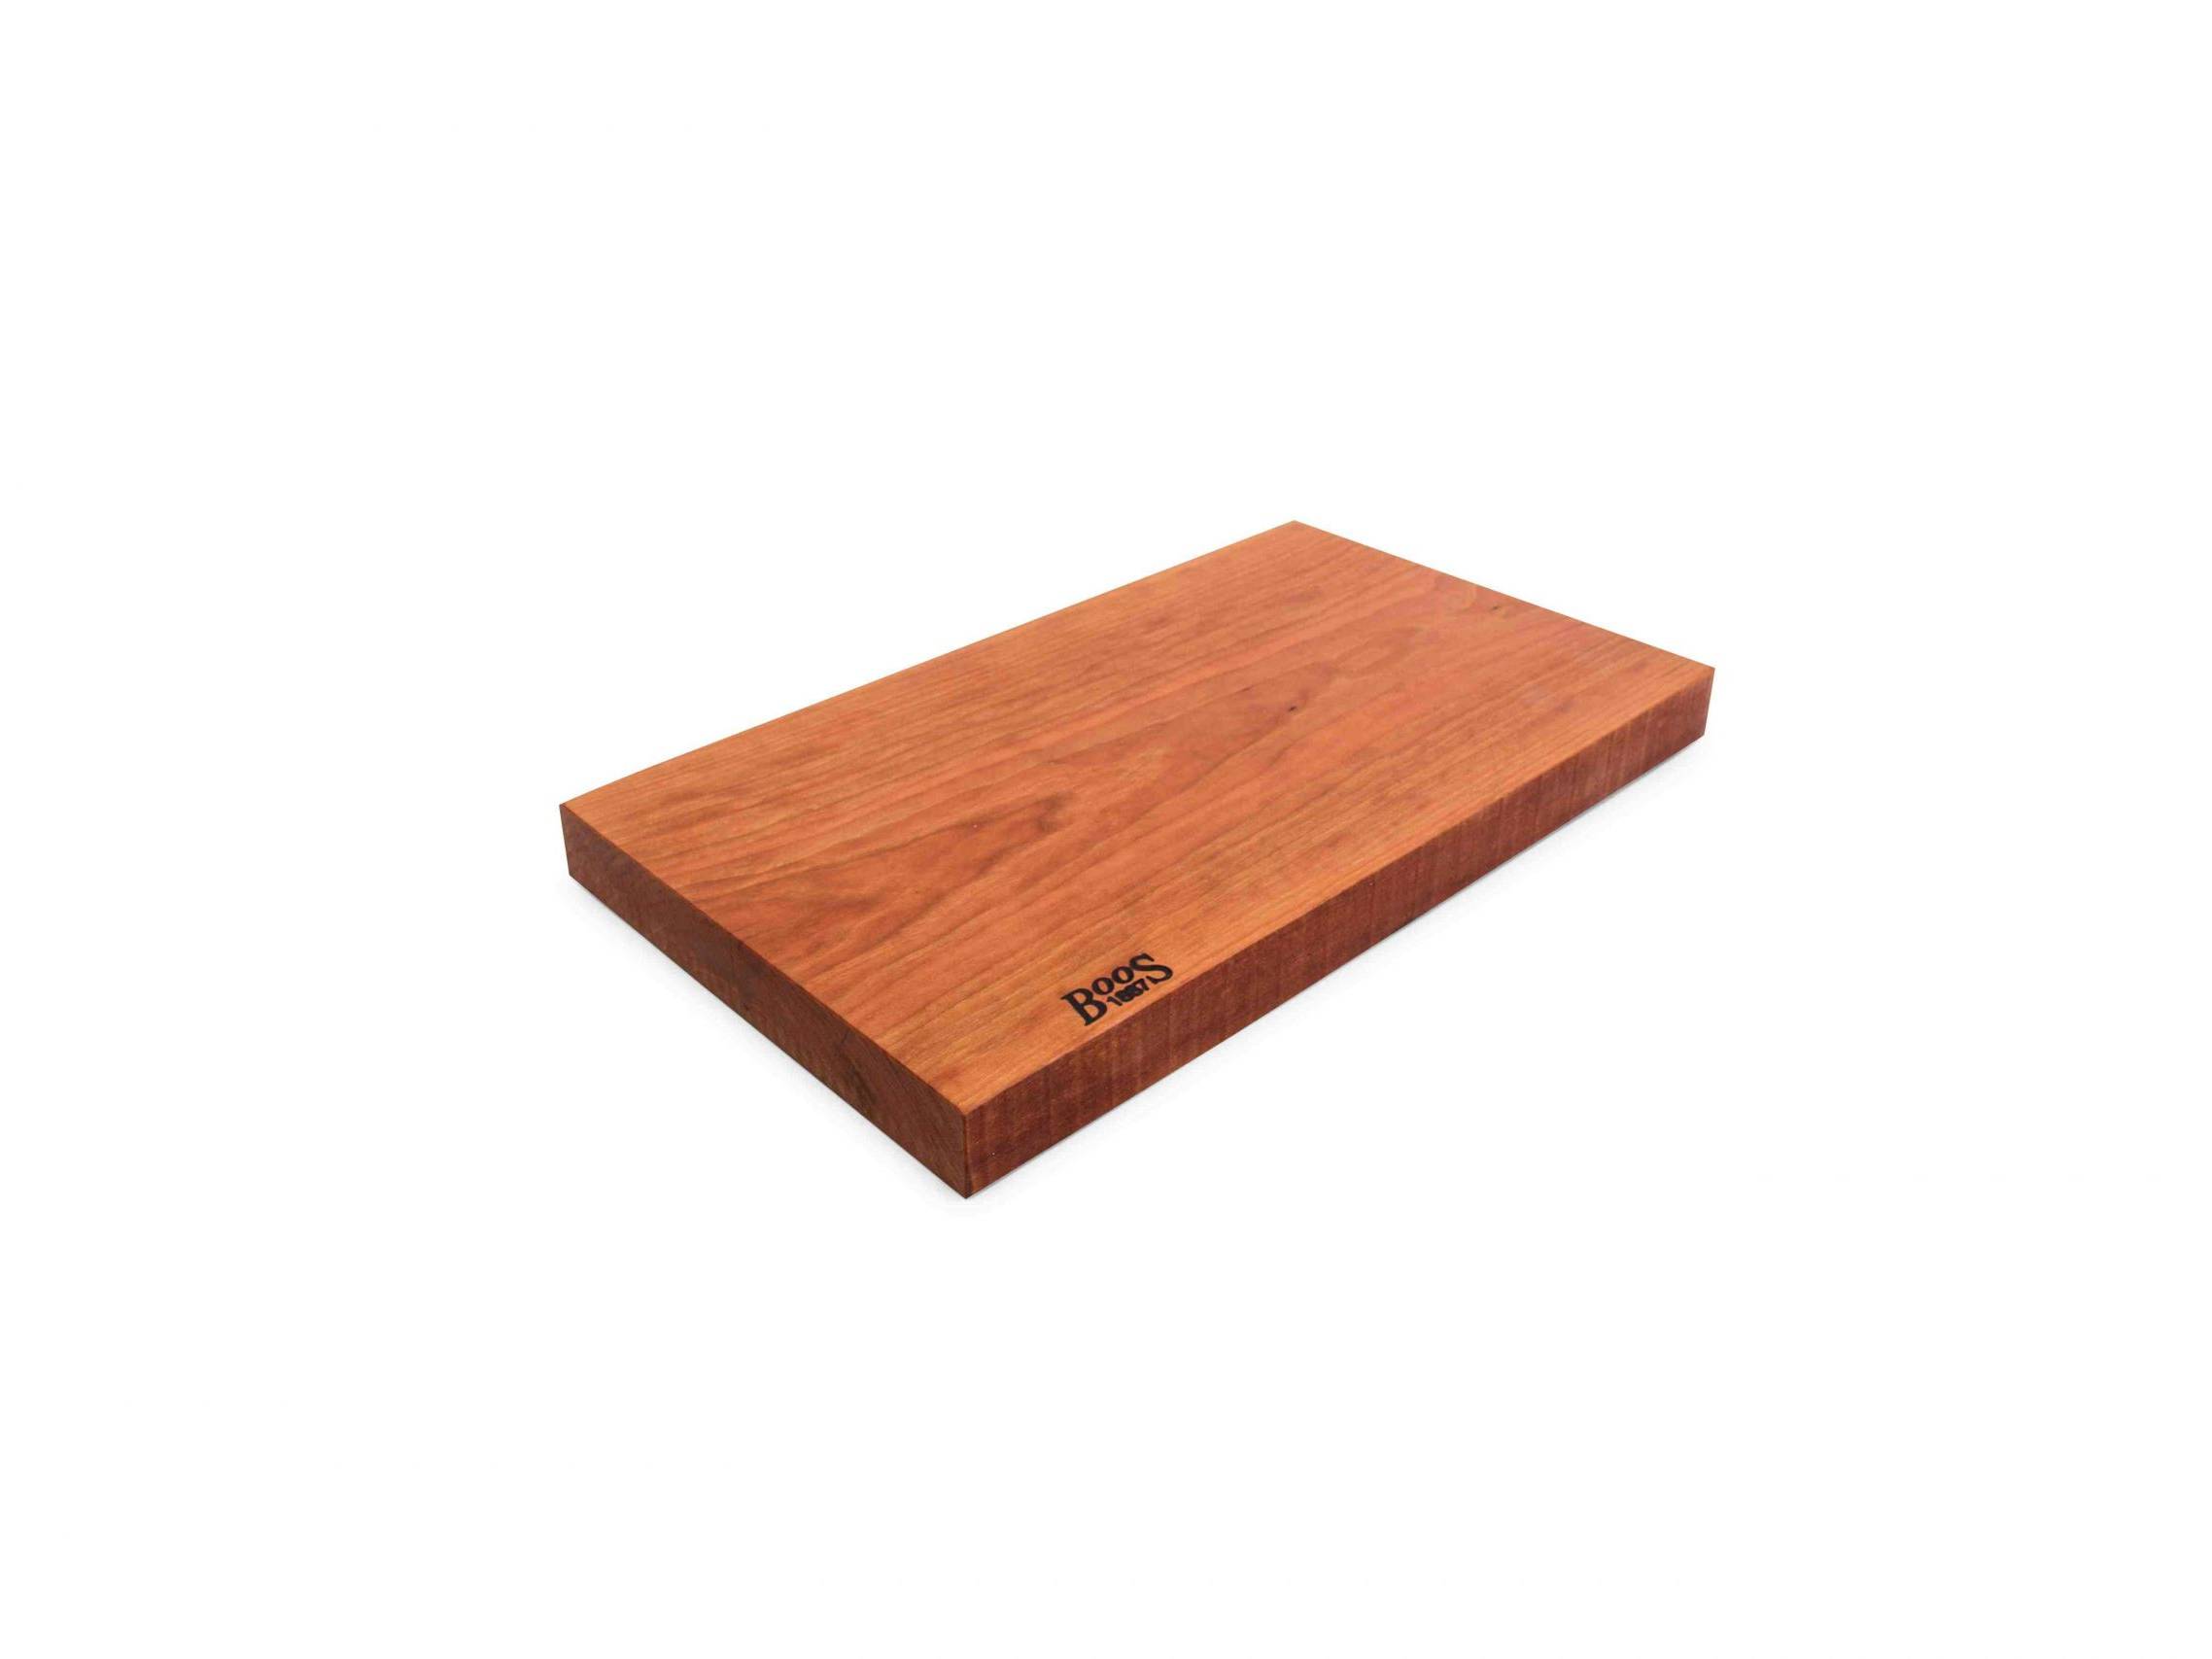 Boos 1887 / Rustic Edge one piece cutting board; American Cherry; can be used on both sides 43